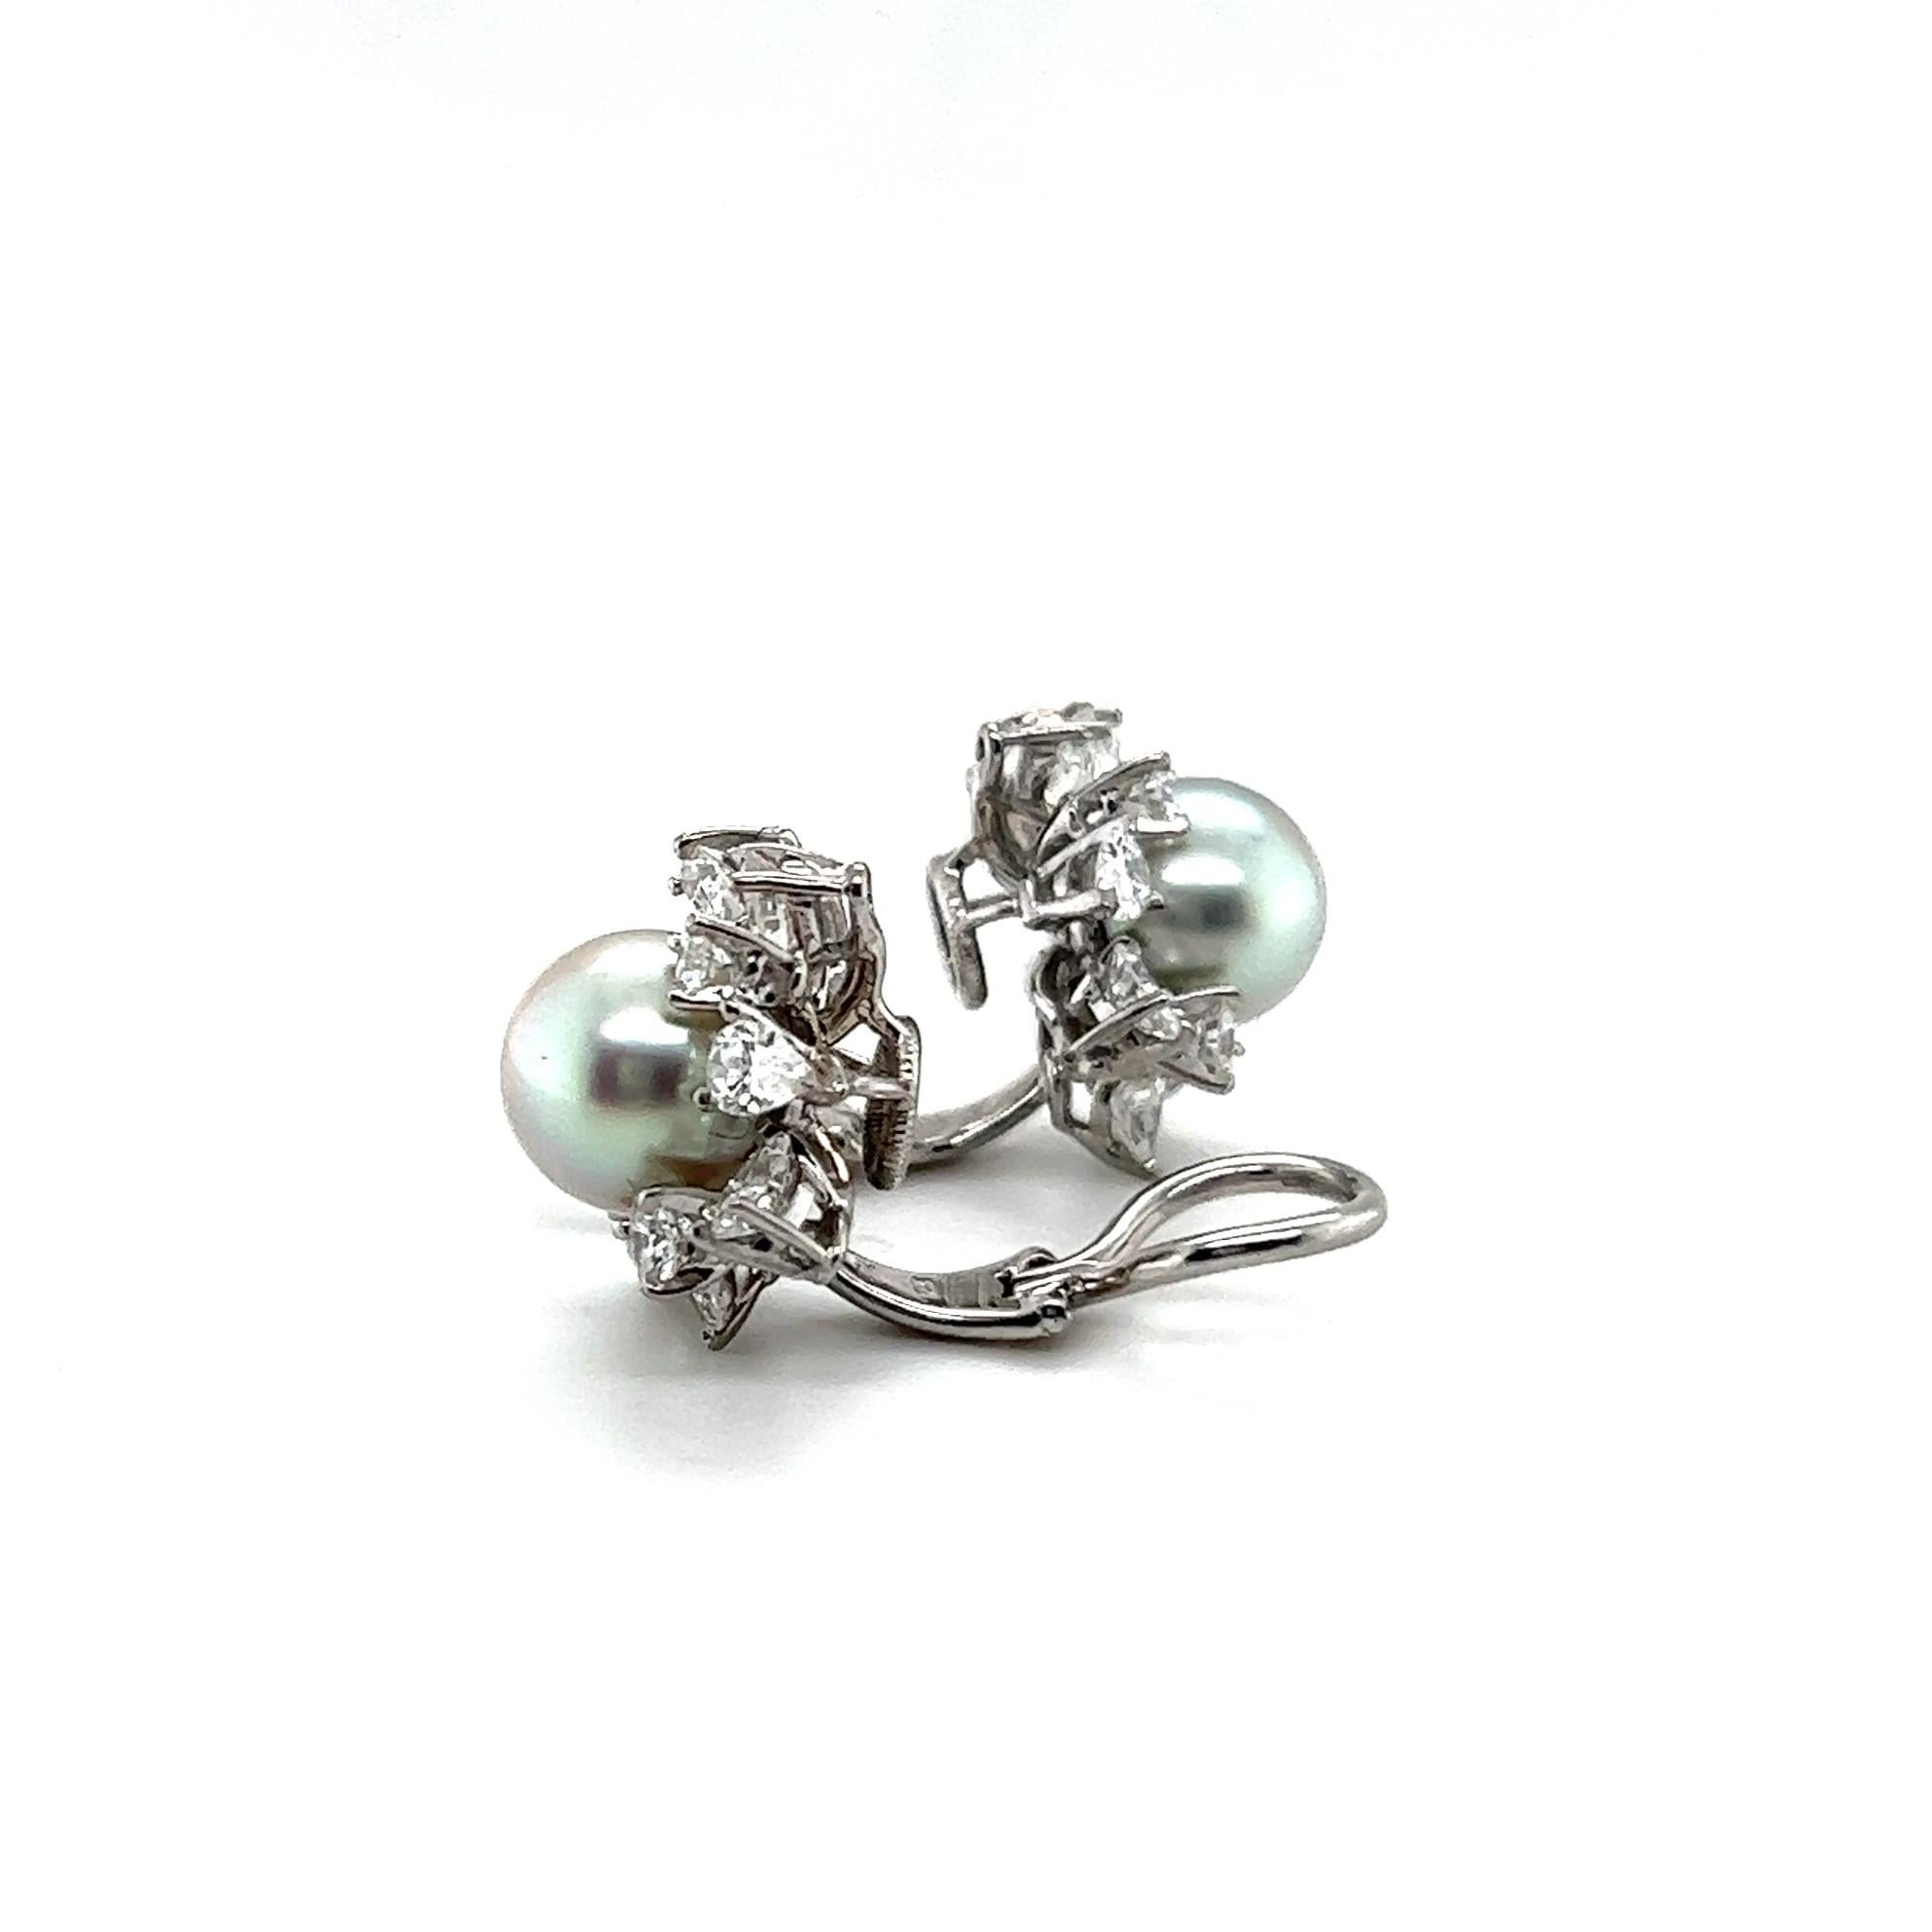 Clip-on Earrings with Pearls and Diamonds in 18 Karat White Gold by Meister 6